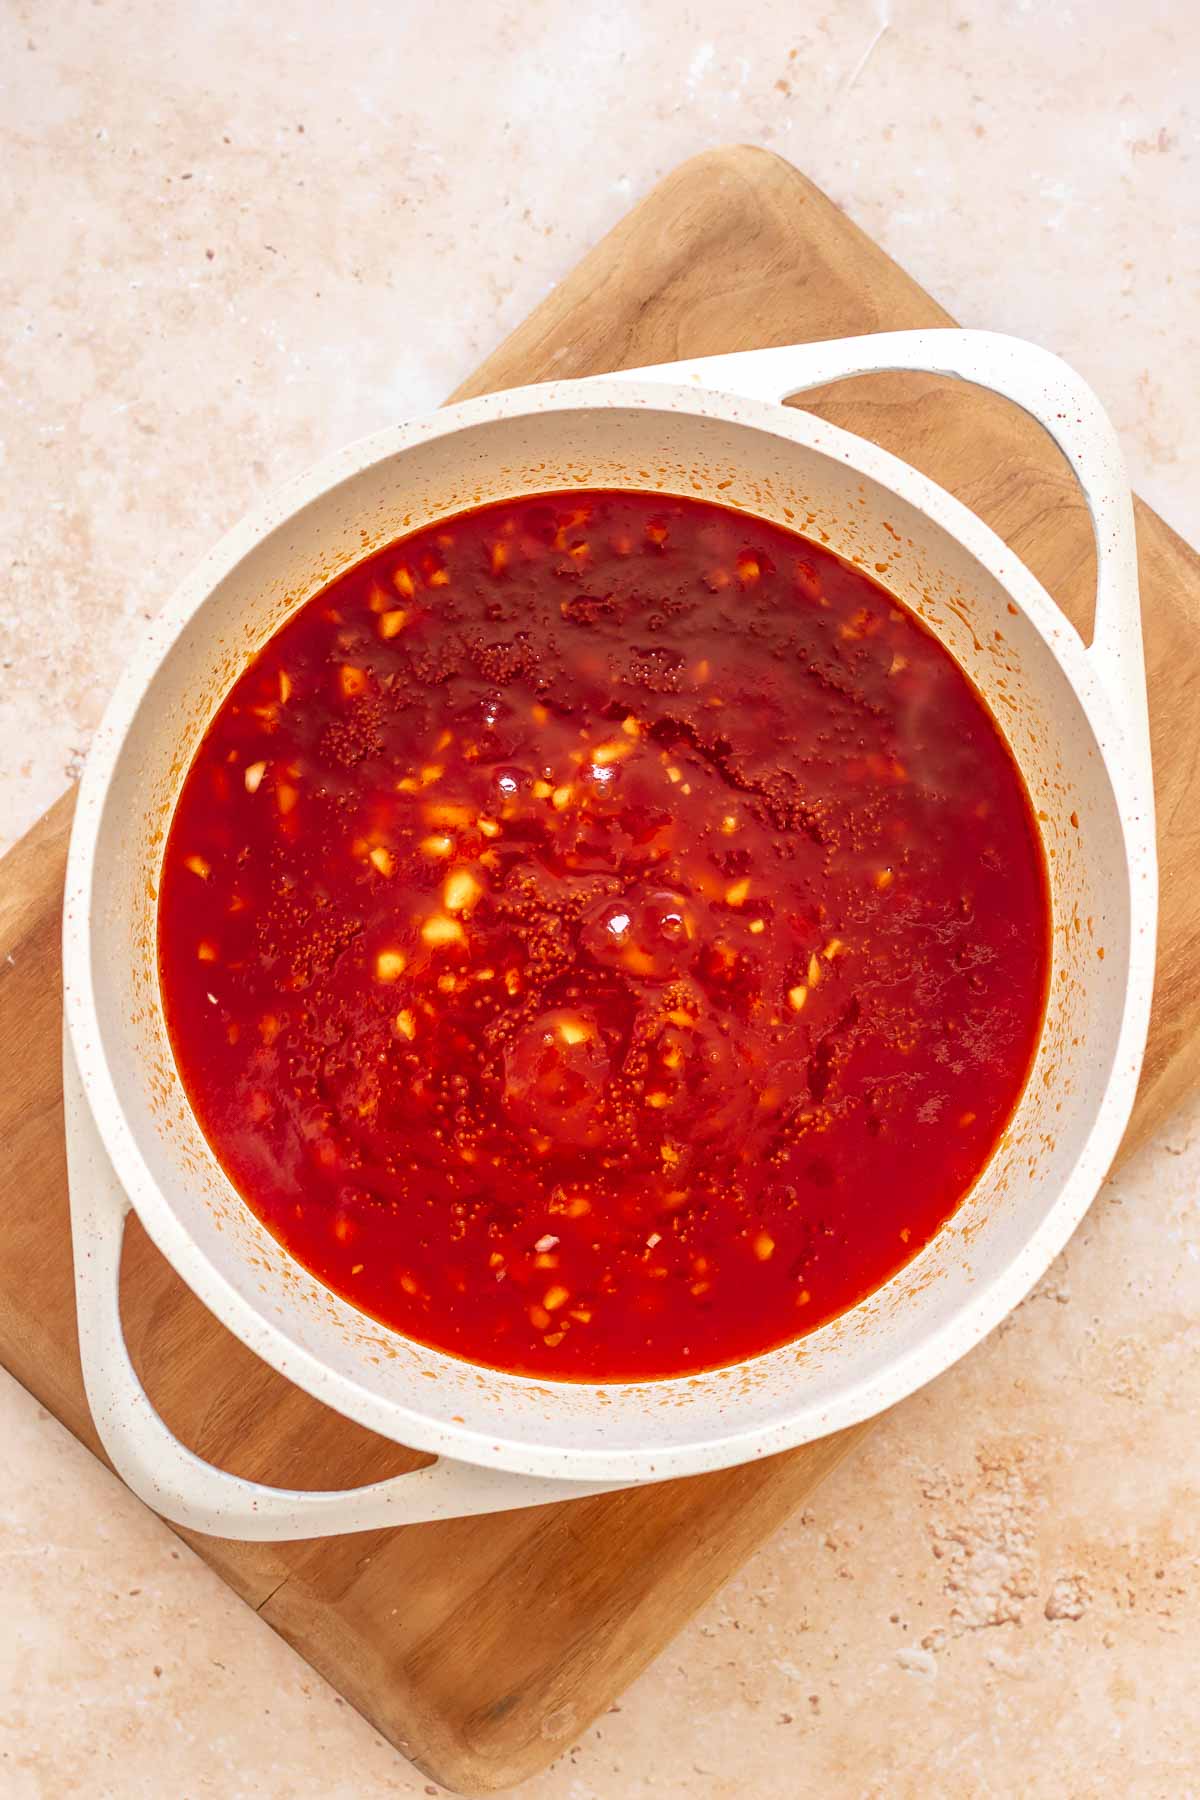 Ingredients for honey sriracha sauce mixed together in a saucepan.